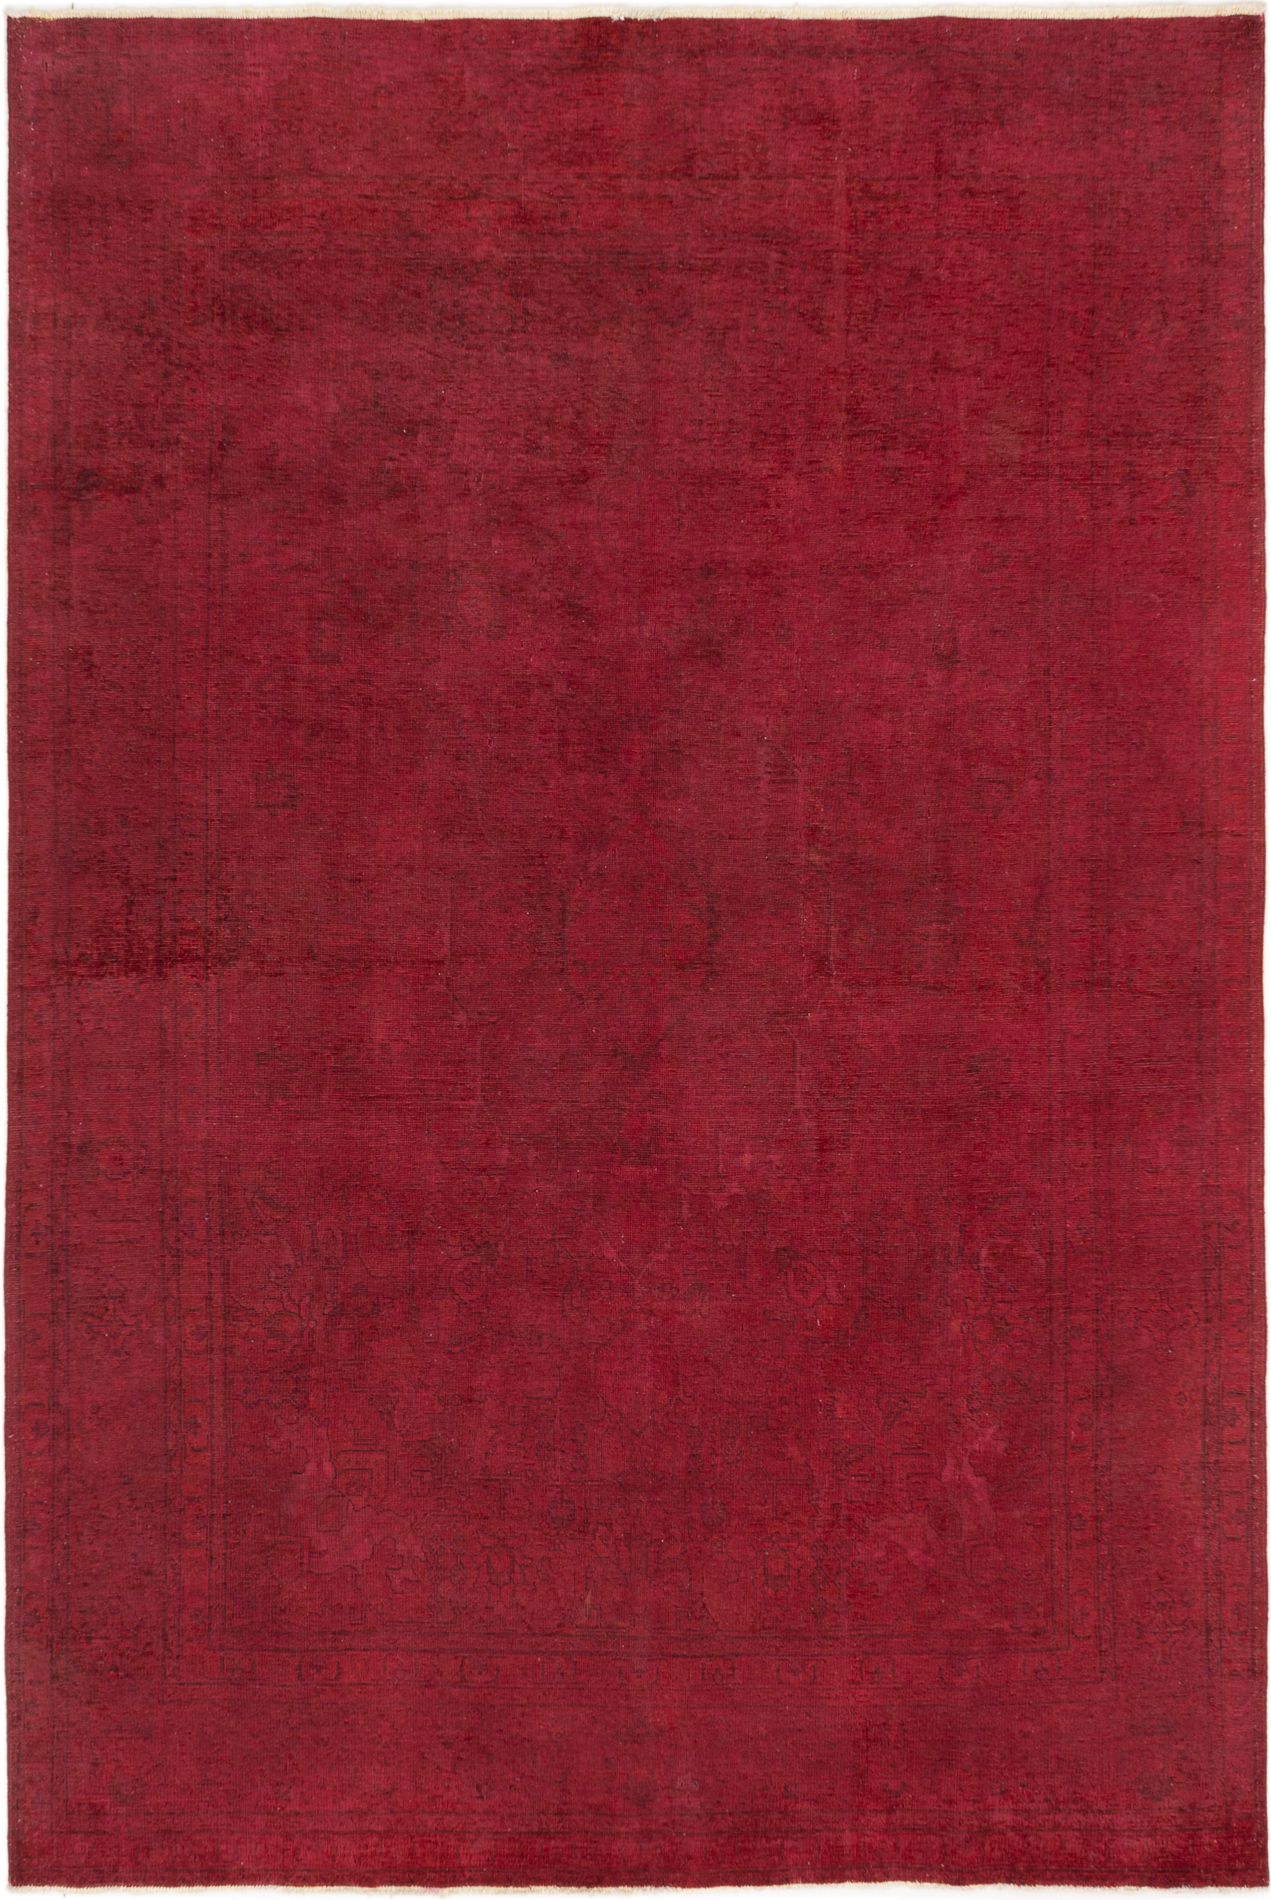 Hand-knotted Color Transition Dark Red Wool Rug 7'6" x 11'1" Size: 7'6" x 11'1"  